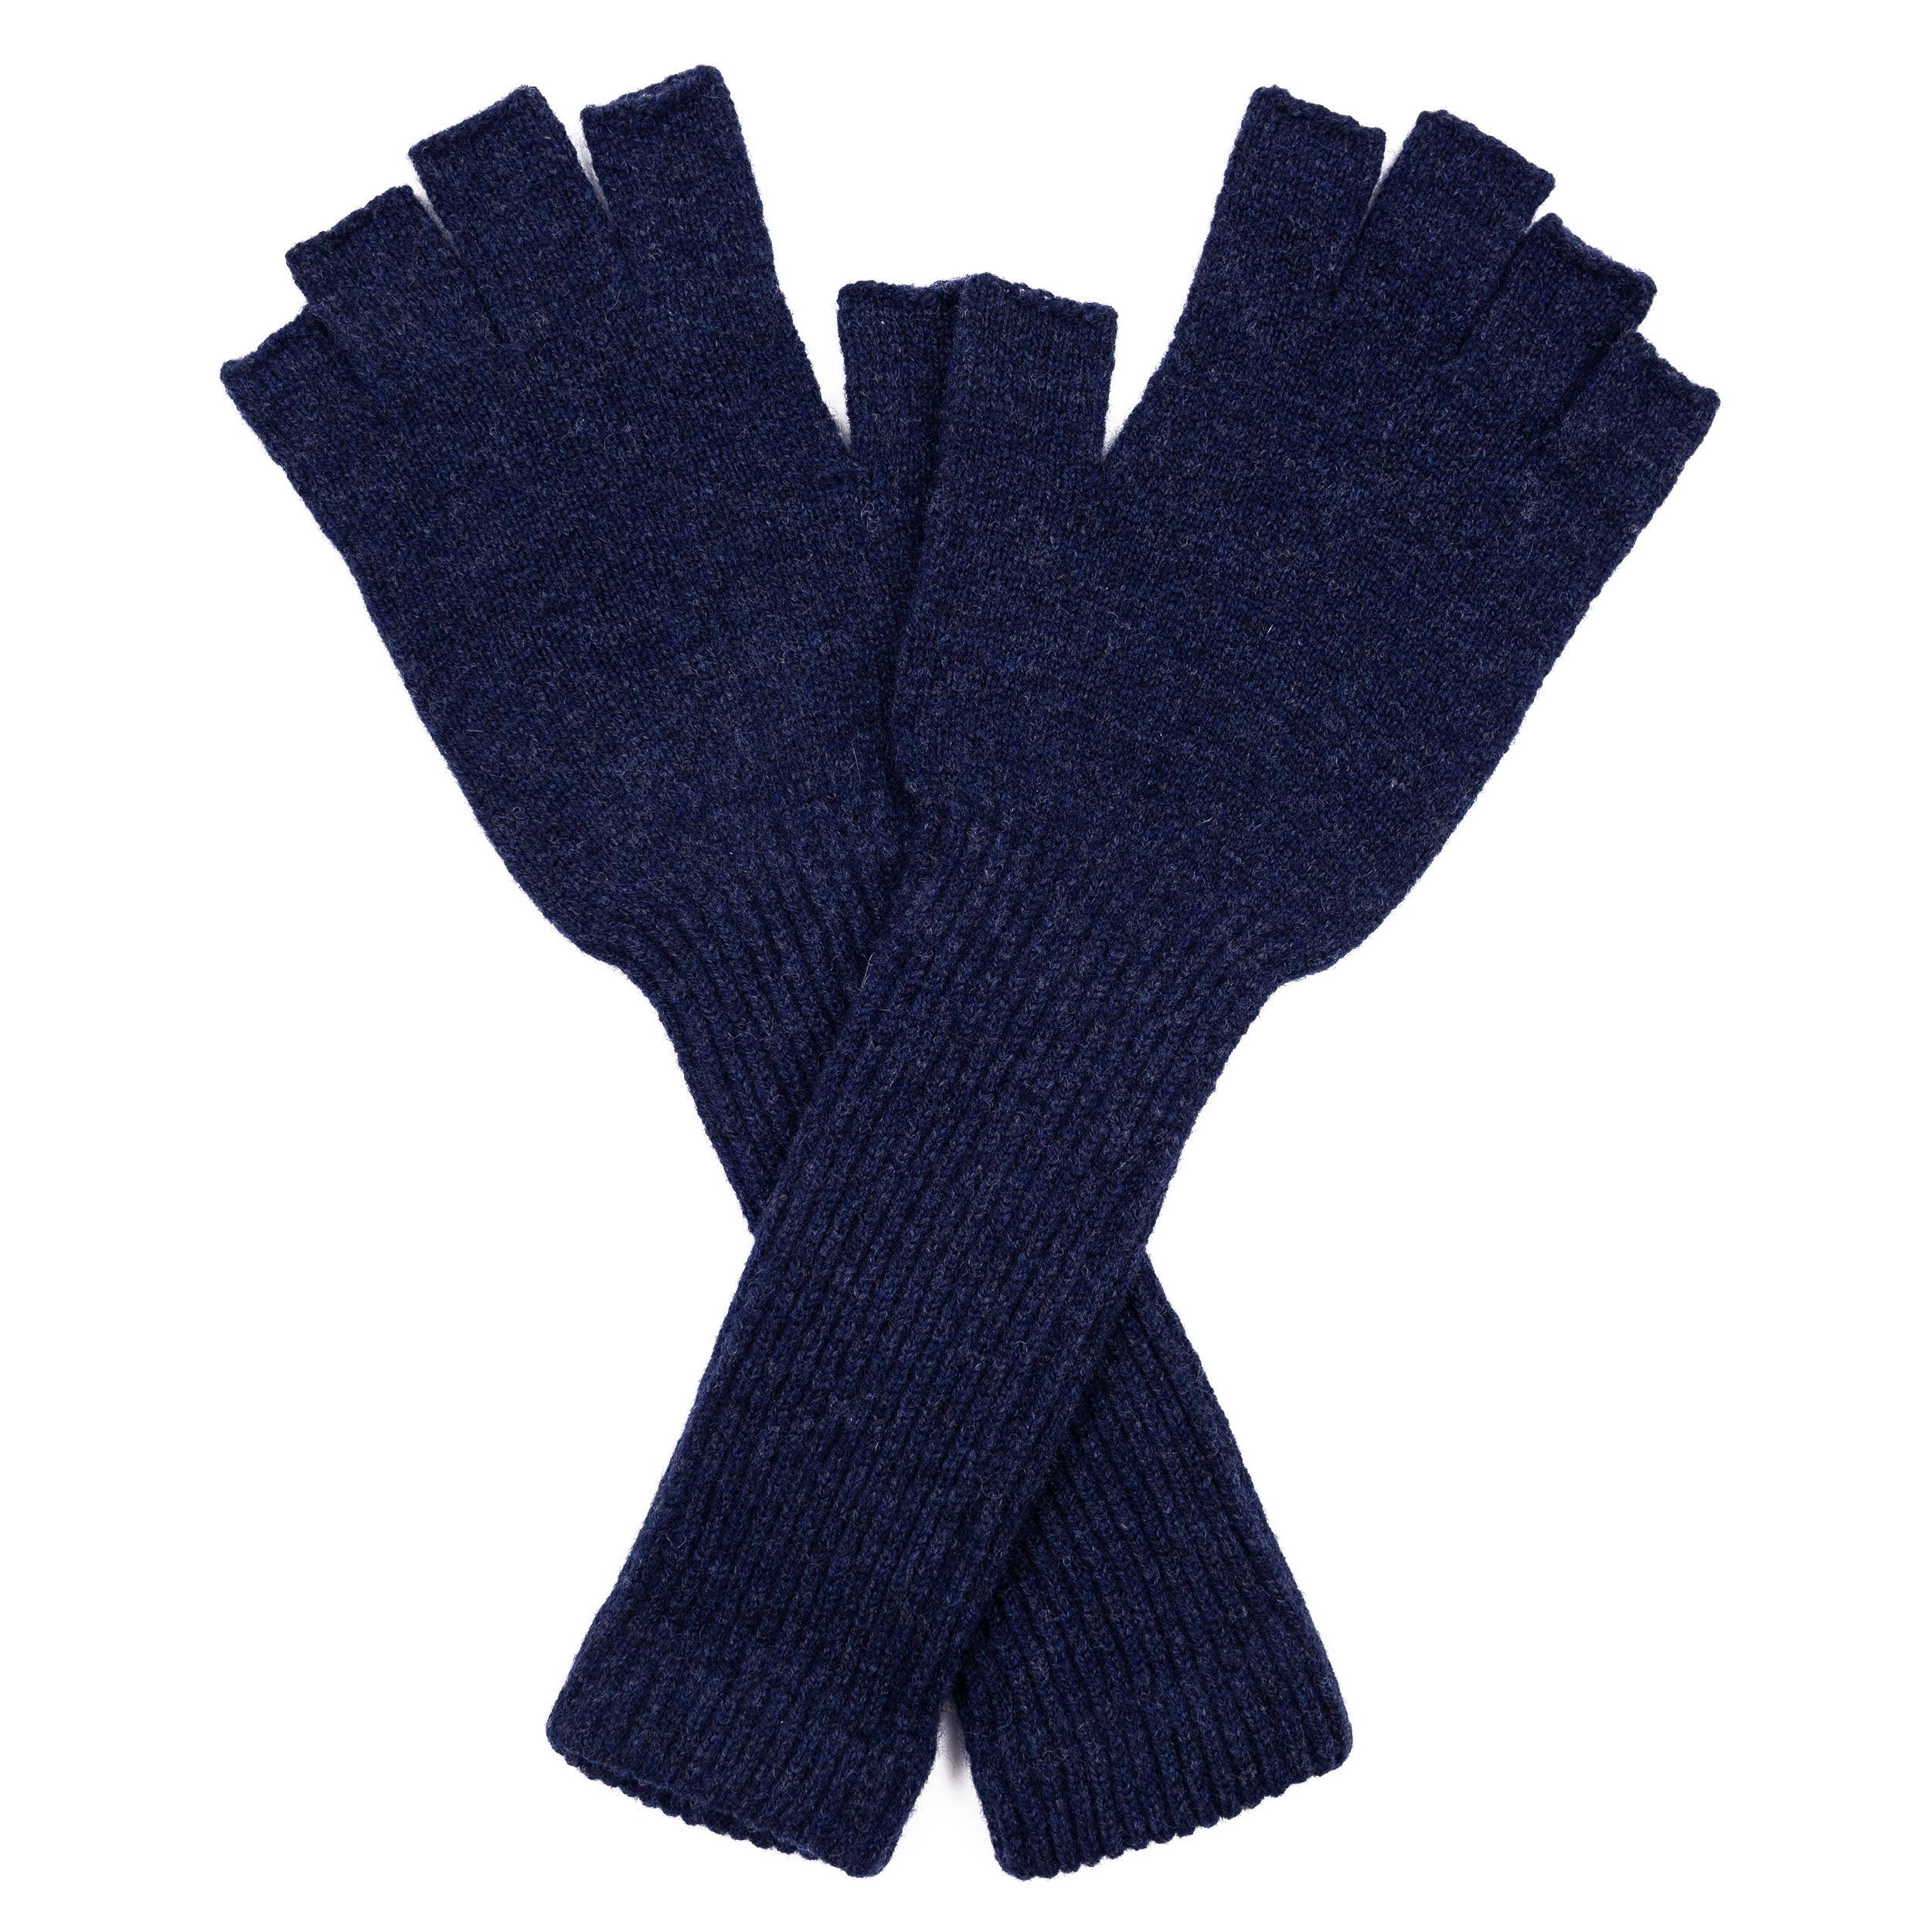 Carrier Company Gathering Glove in Navy Marl